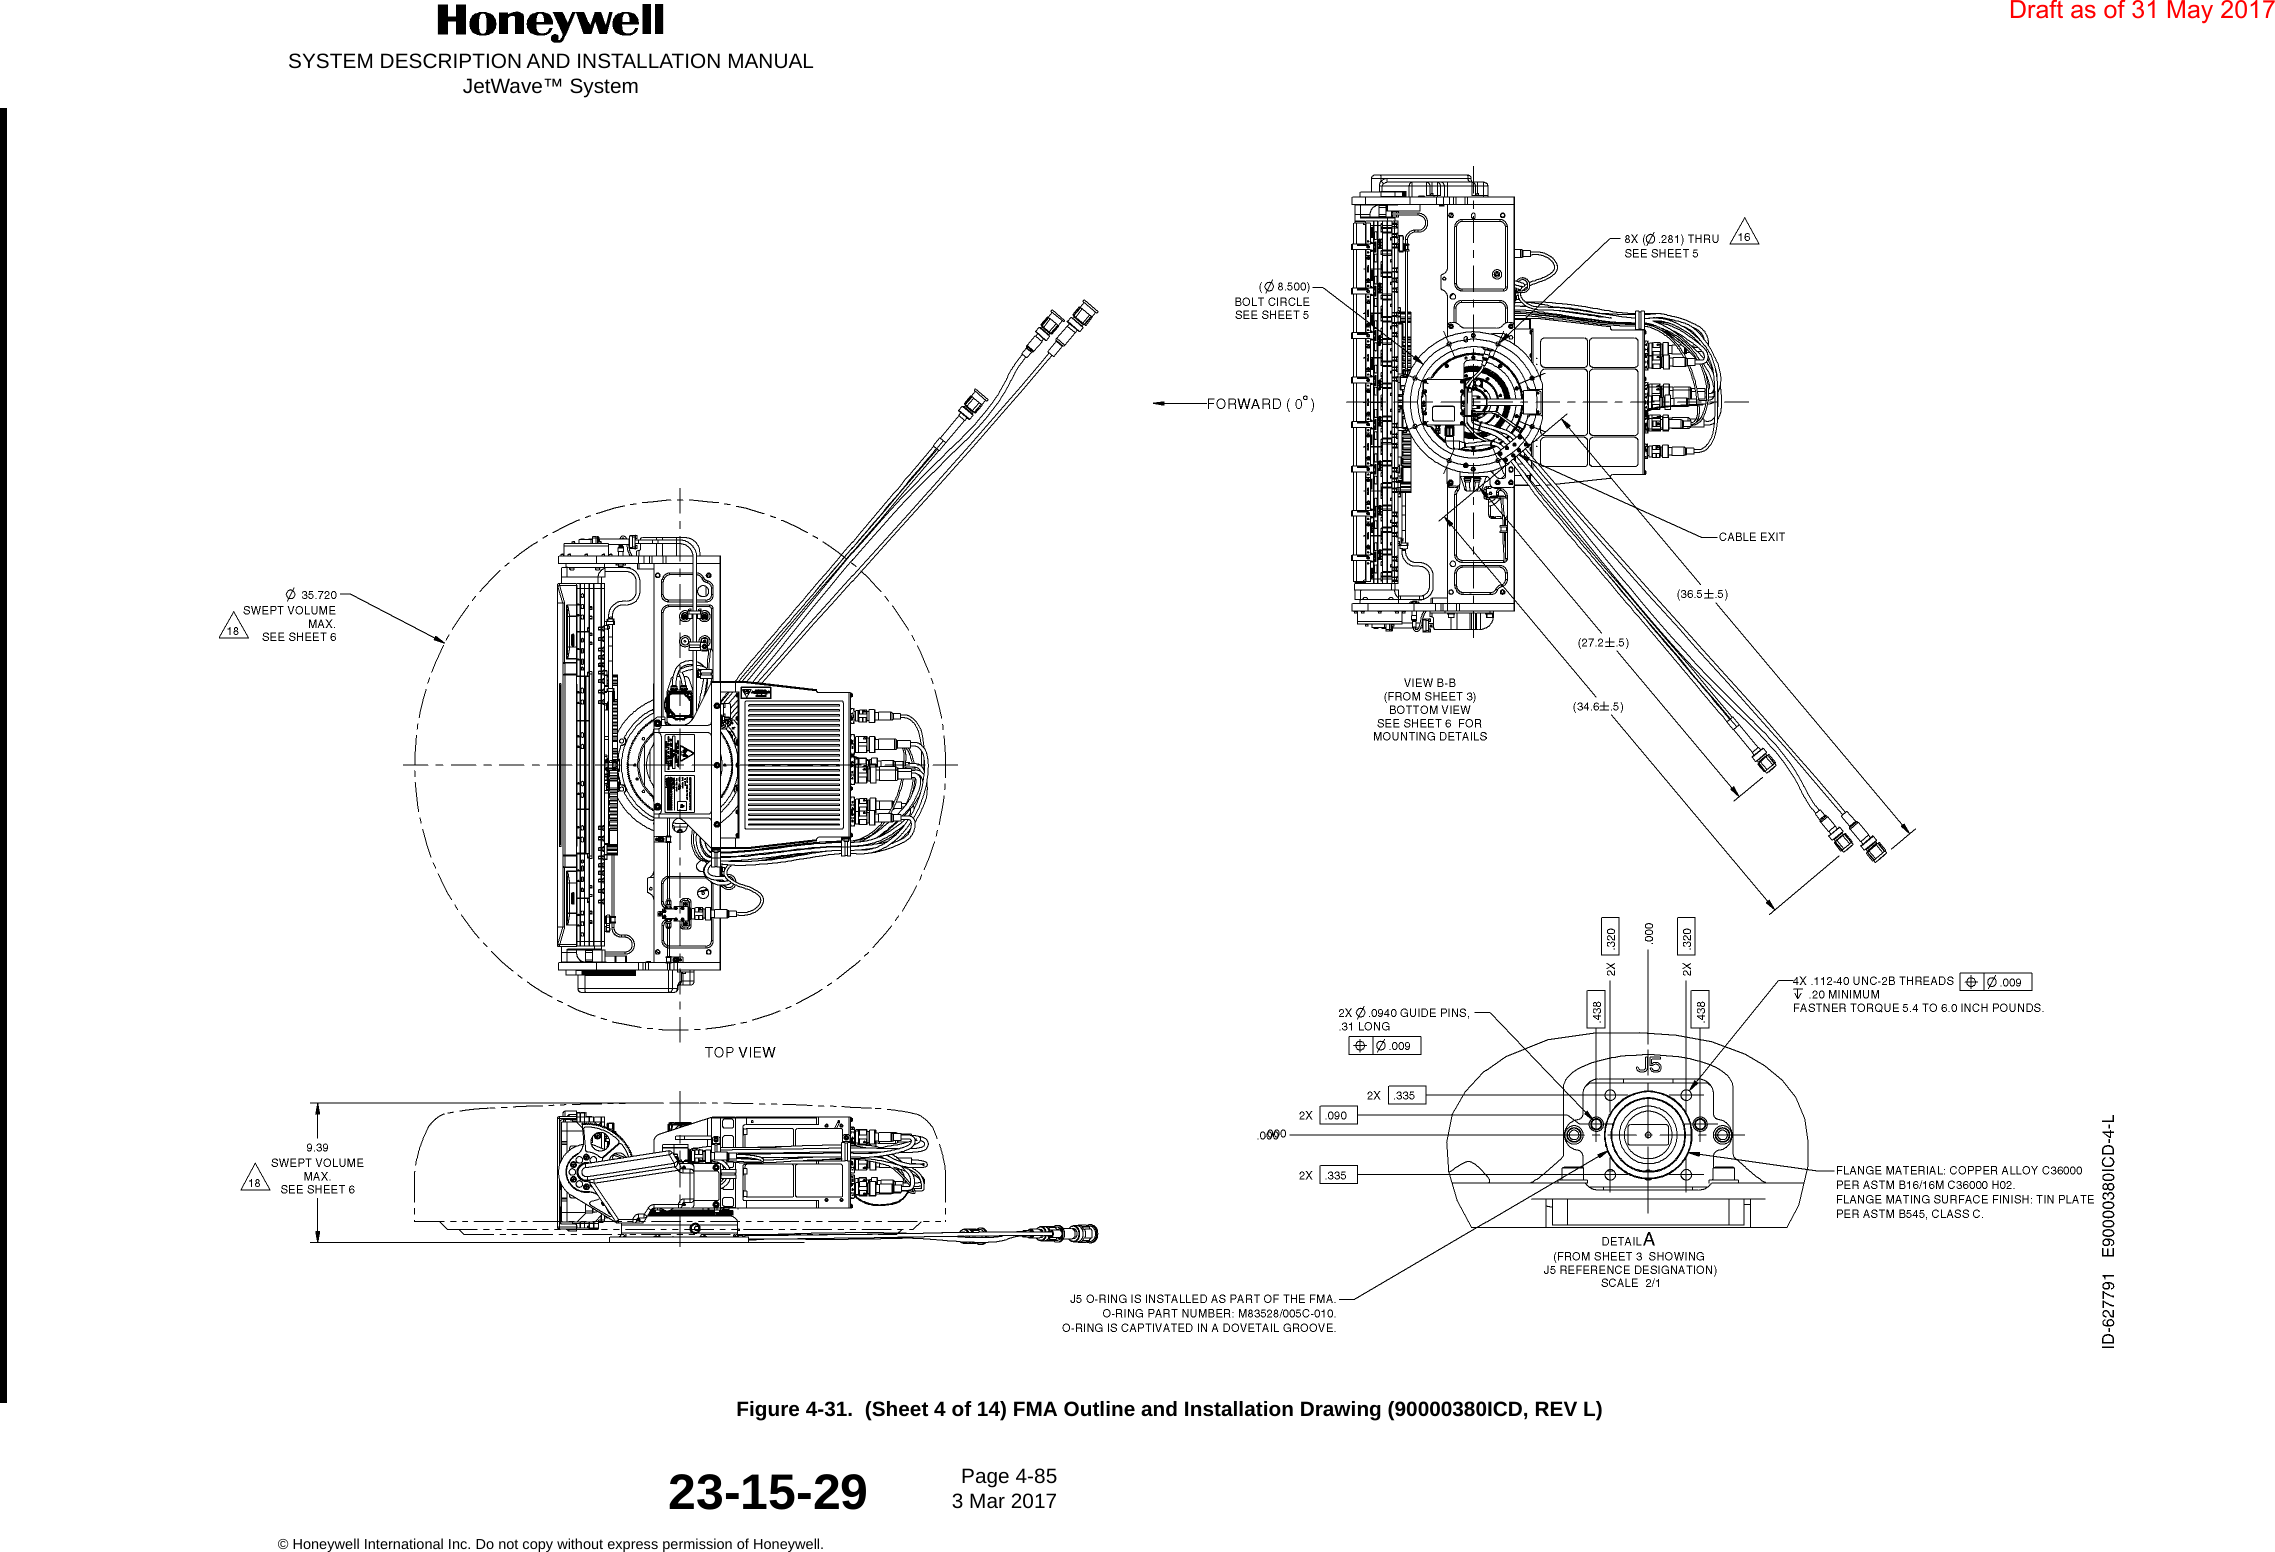 SYSTEM DESCRIPTION AND INSTALLATION MANUALJetWave™ SystemPage 4-85 3 Mar 2017© Honeywell International Inc. Do not copy without express permission of Honeywell.23-15-29Figure 4-31.  (Sheet 4 of 14) FMA Outline and Installation Drawing (90000380ICD, REV L)Draft as of 31 May 2017